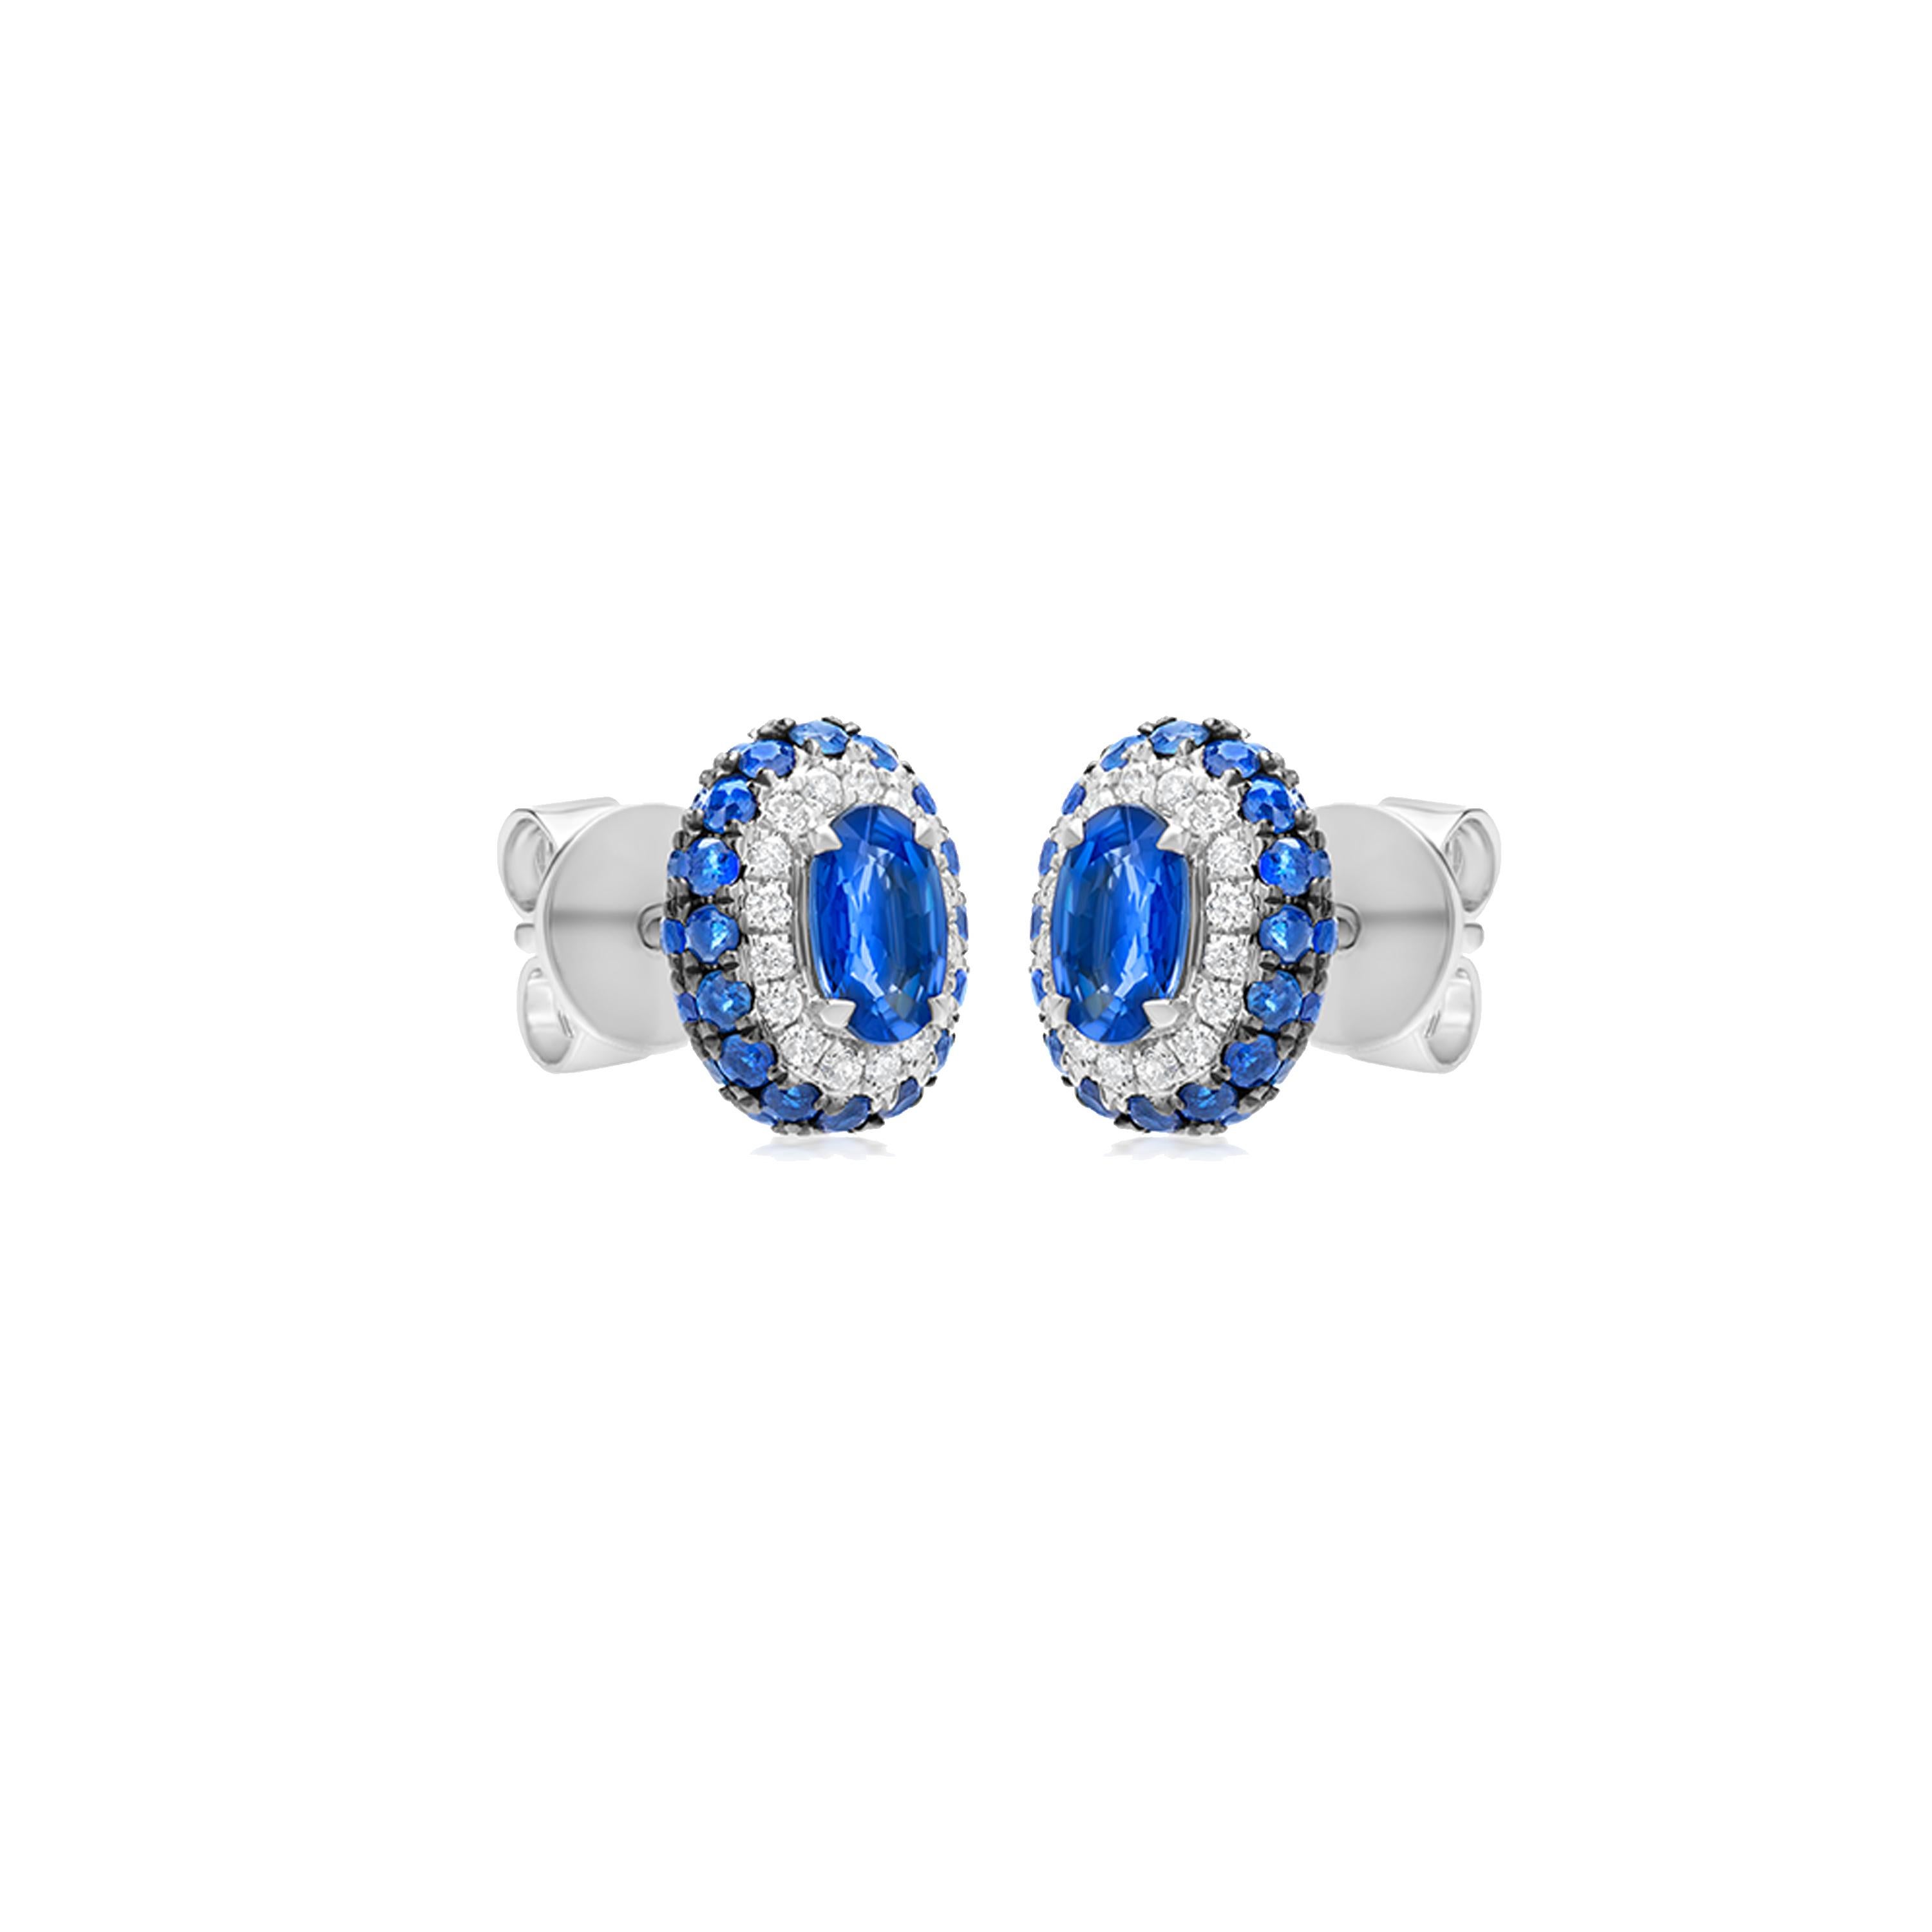 This lightweight yet heavily studded ear stud pair is manifested on an 18K White Gold with black rhodium pave.  Round full-cut White Diamonds are affixed on the stunning earring pair in a micro pave setting. Two oval-shaped Blue Sapphire stones are